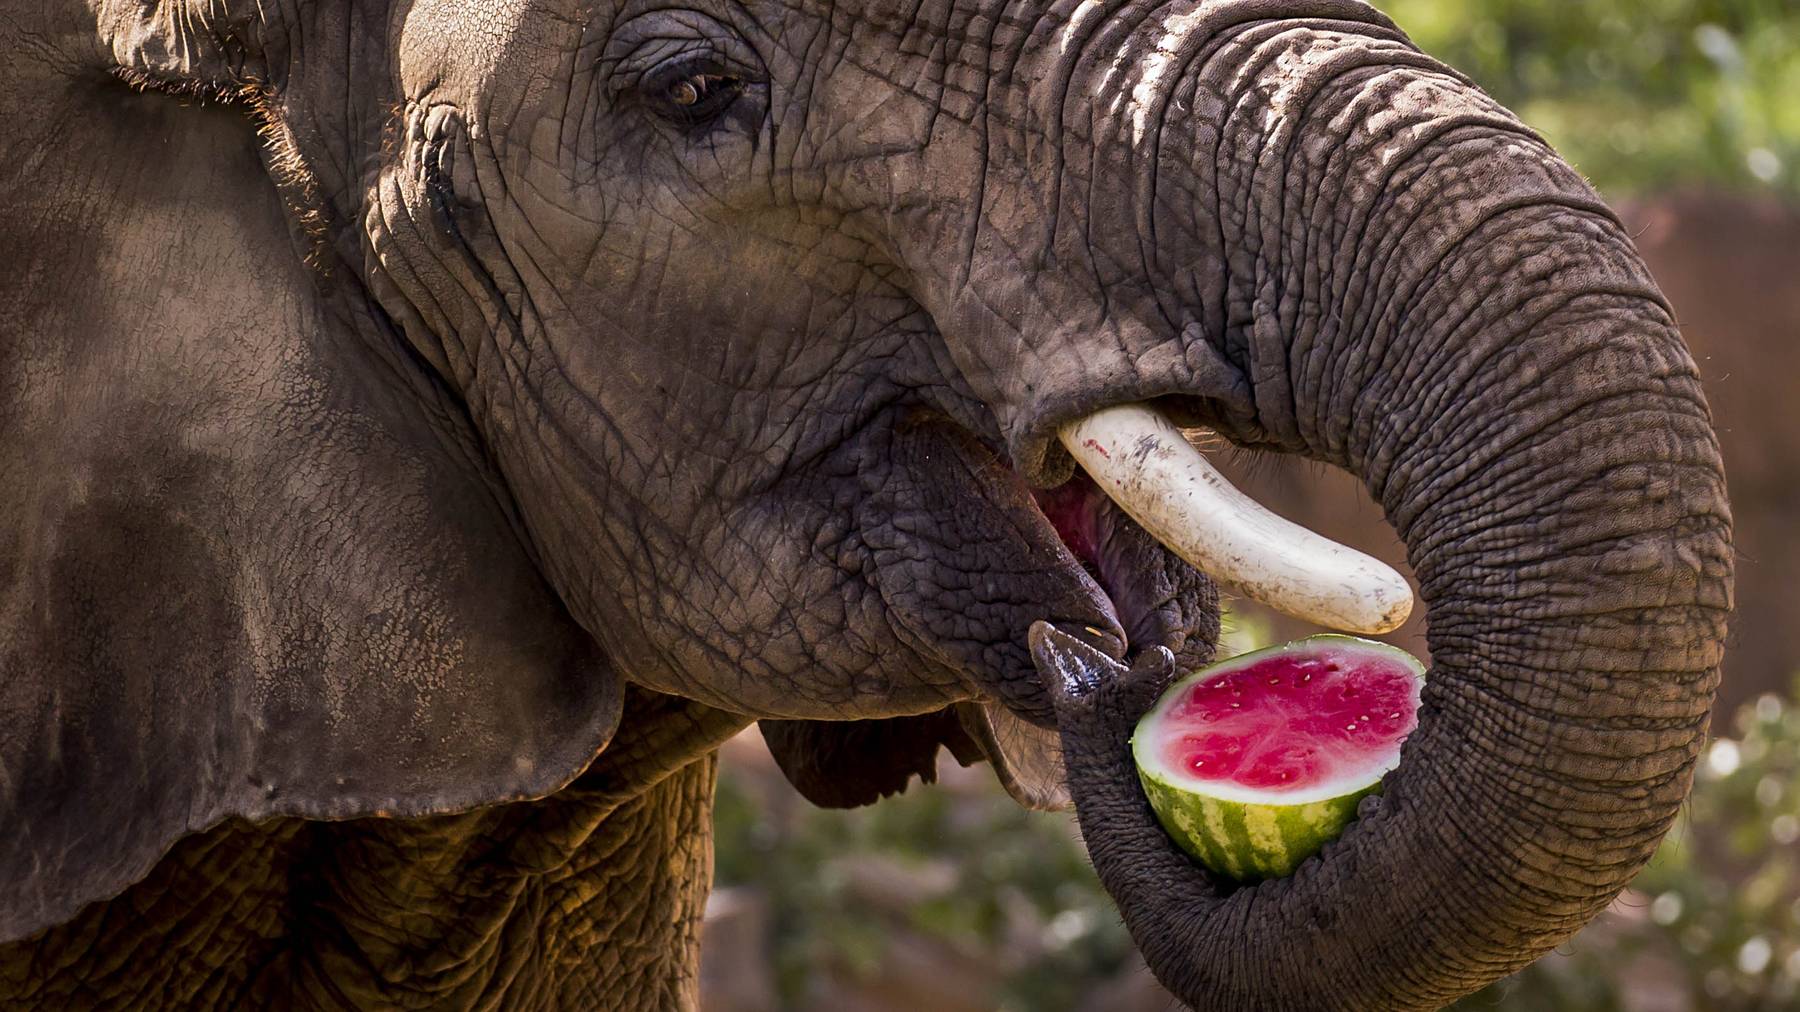 What do elephants drink and eat?